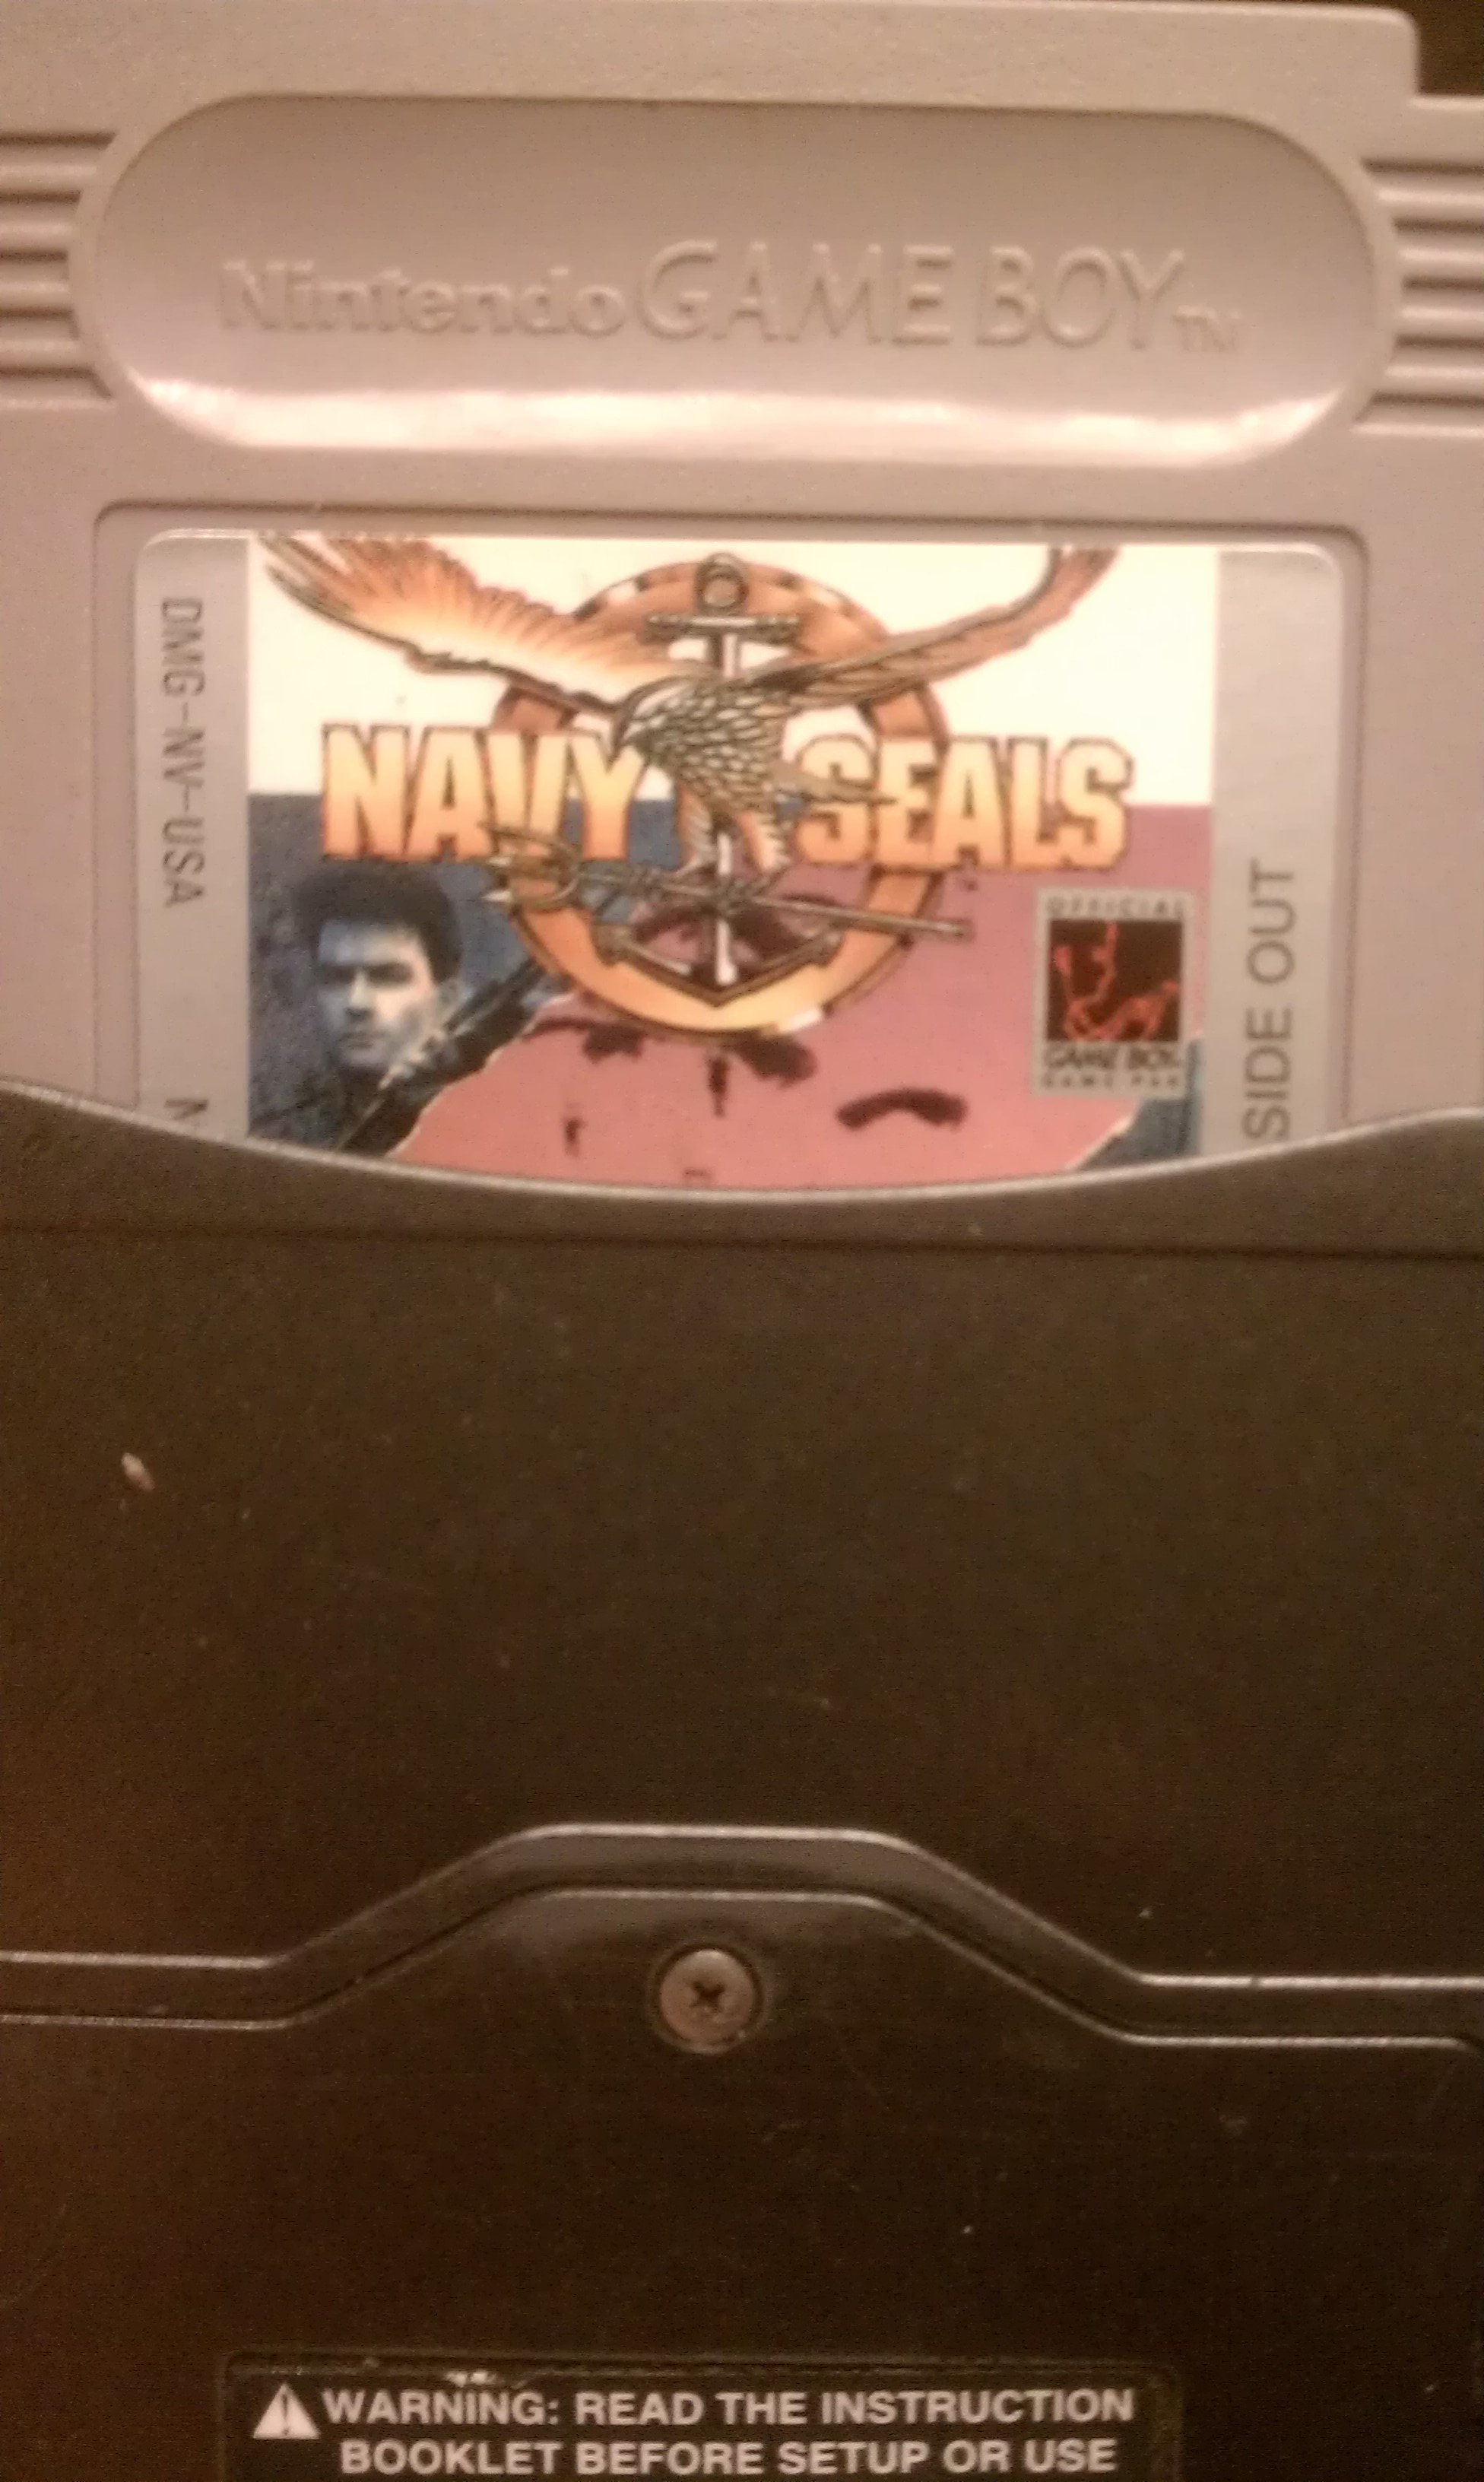 S.BAZ: Navy Seals (Game Boy) 11,450 points on 2018-08-24 16:57:56